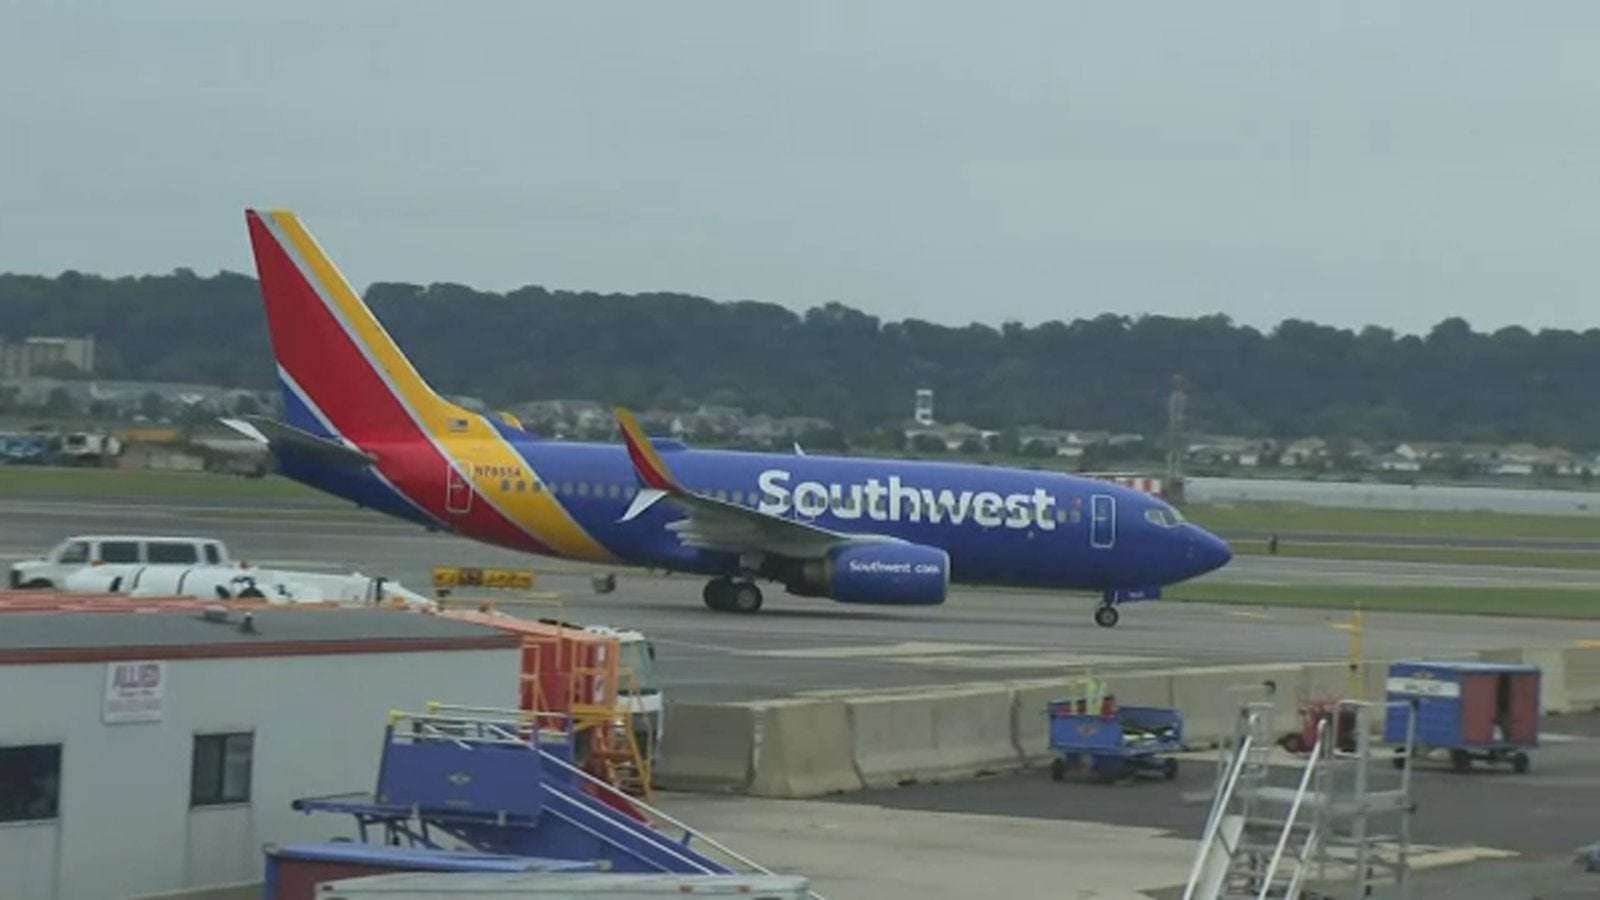 image for Pilot under investigation for saying 'Let's go Brandon' during announcement, Southwest Airlines says